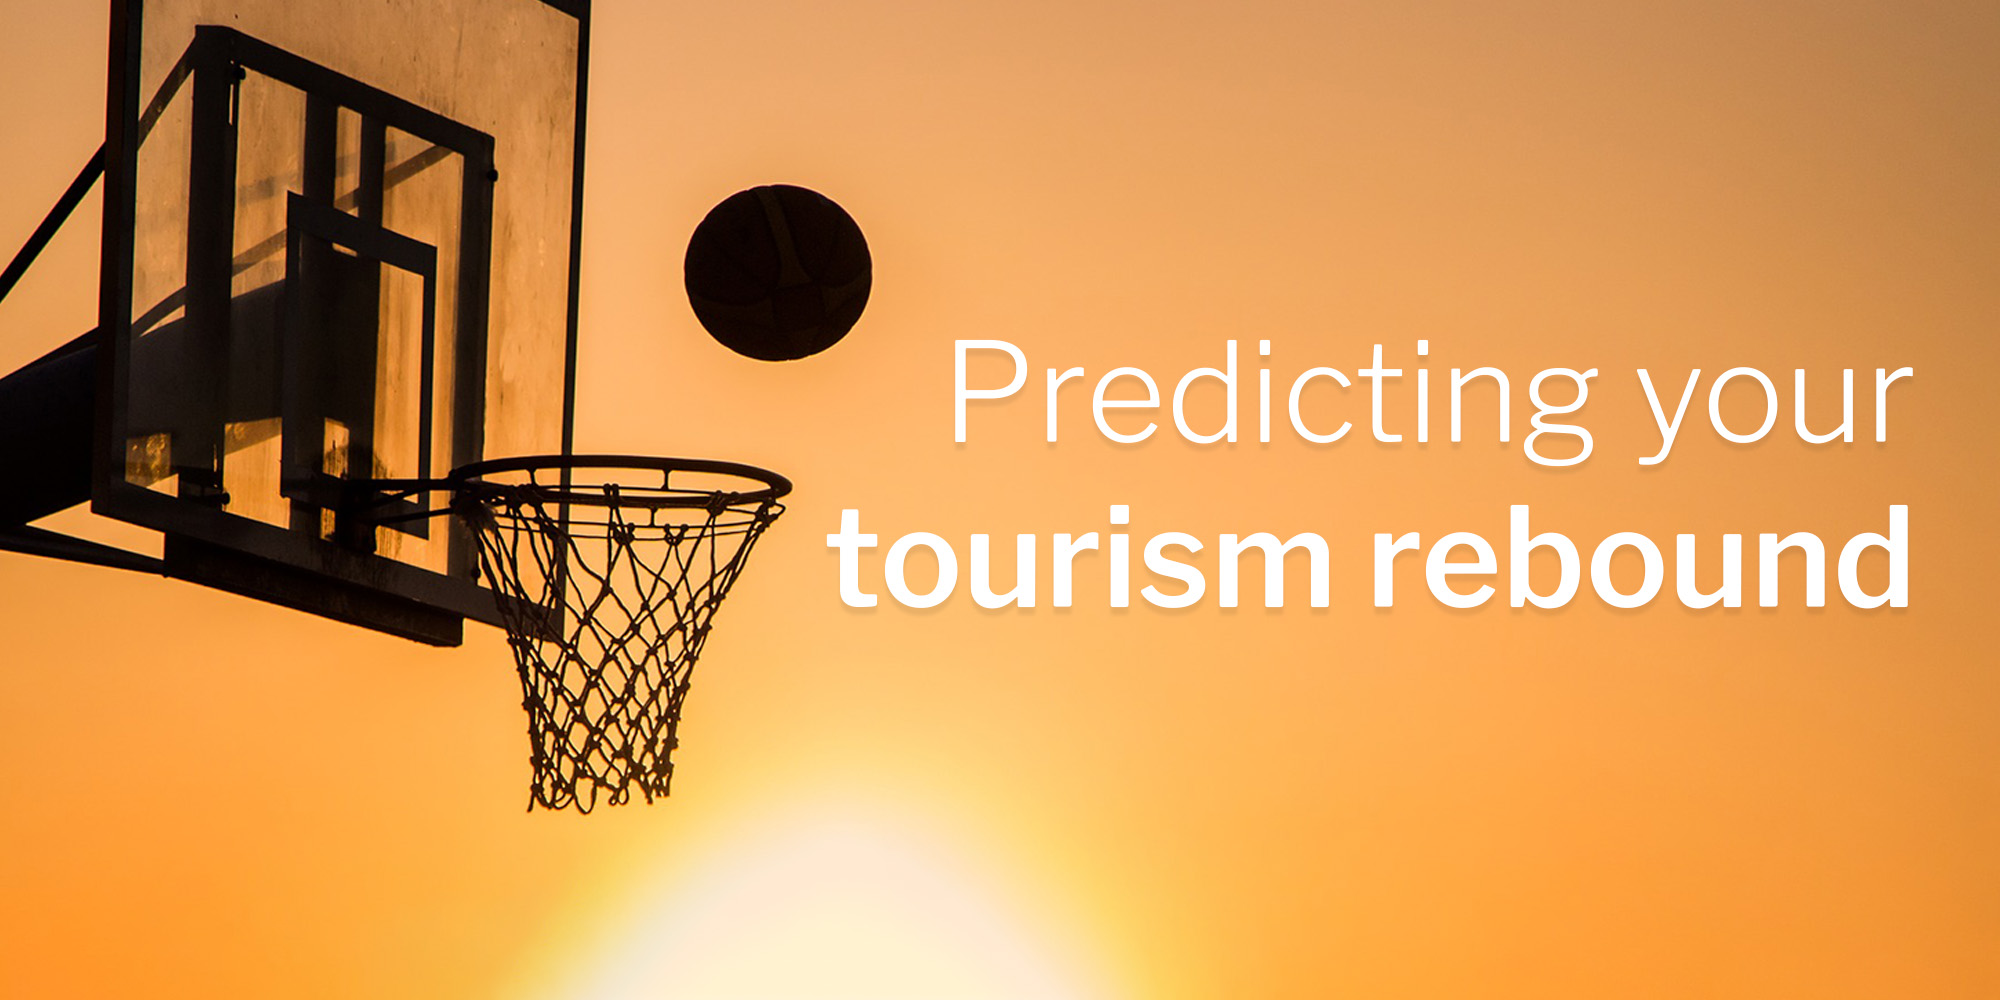 A data driven approach to monitoring the tourism rebound